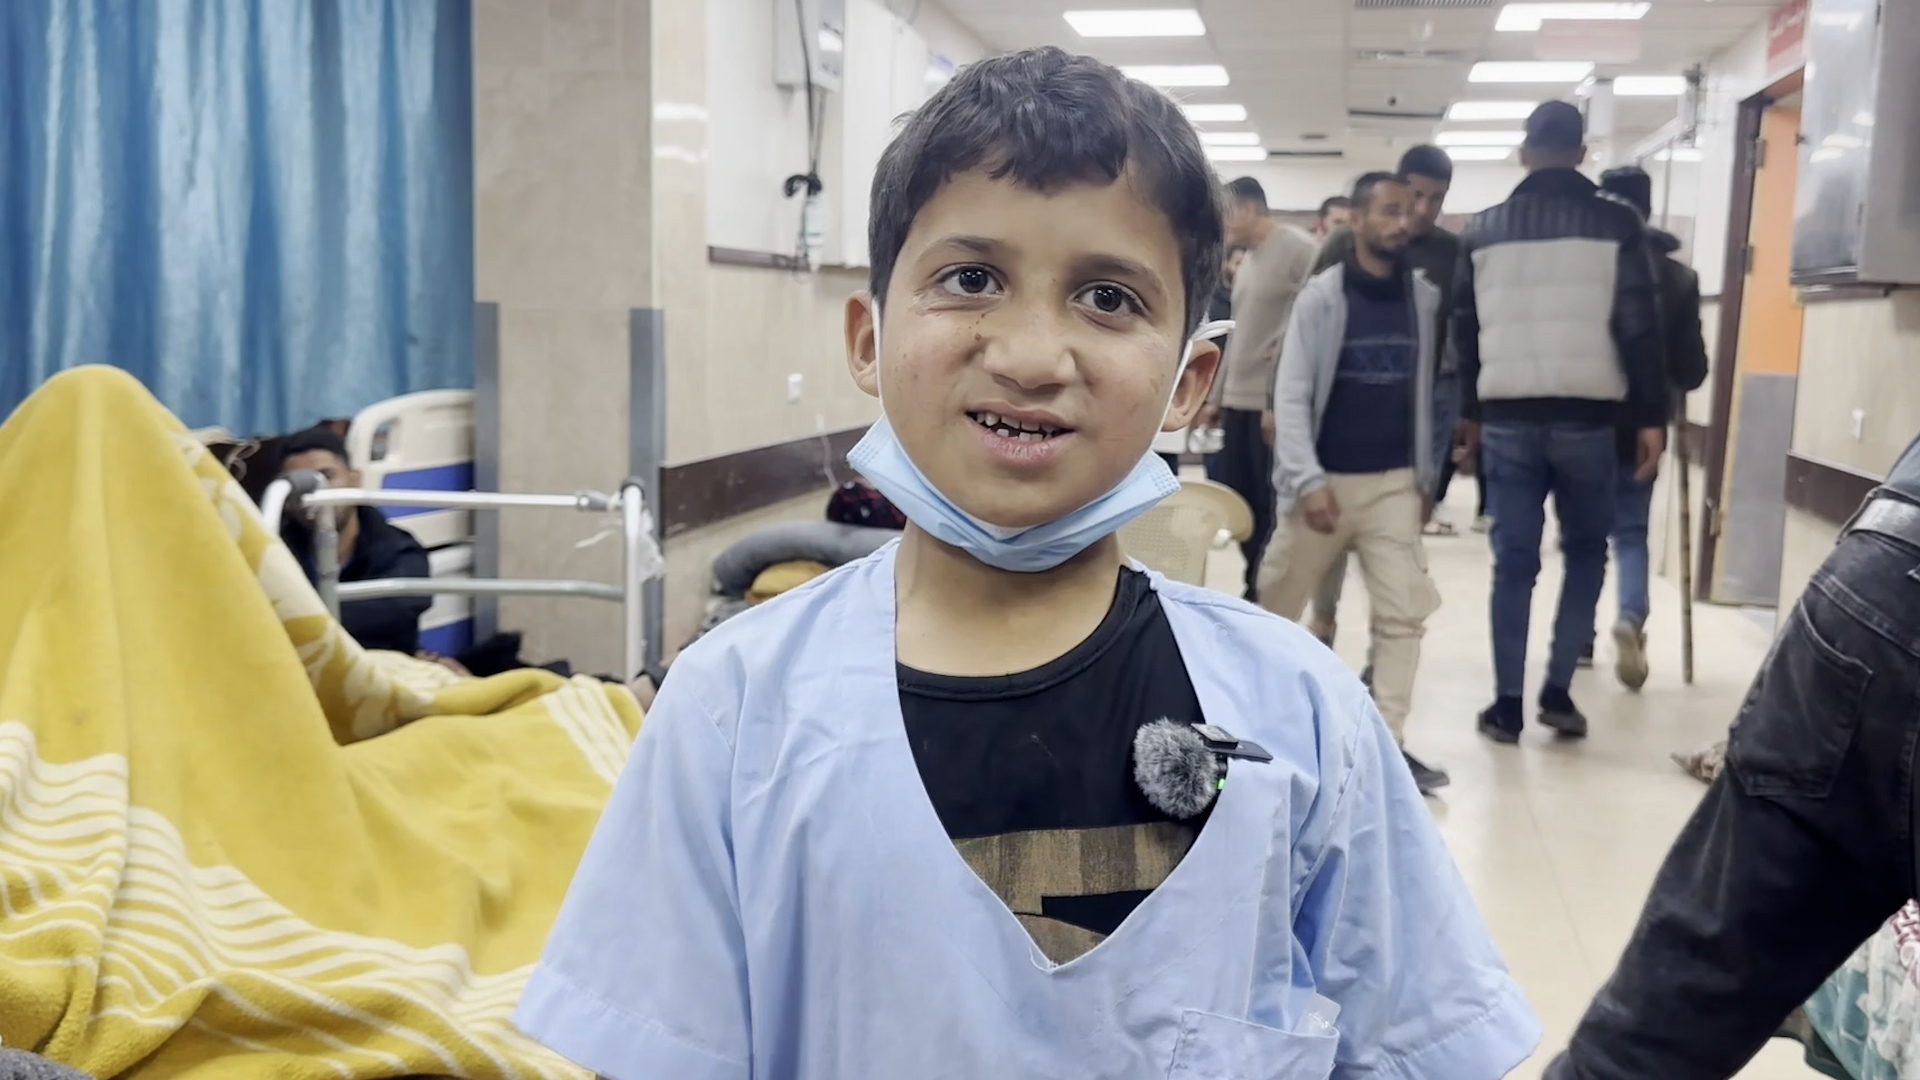 Displaced 12-year-old boy becomes Gaza’s youngest medic